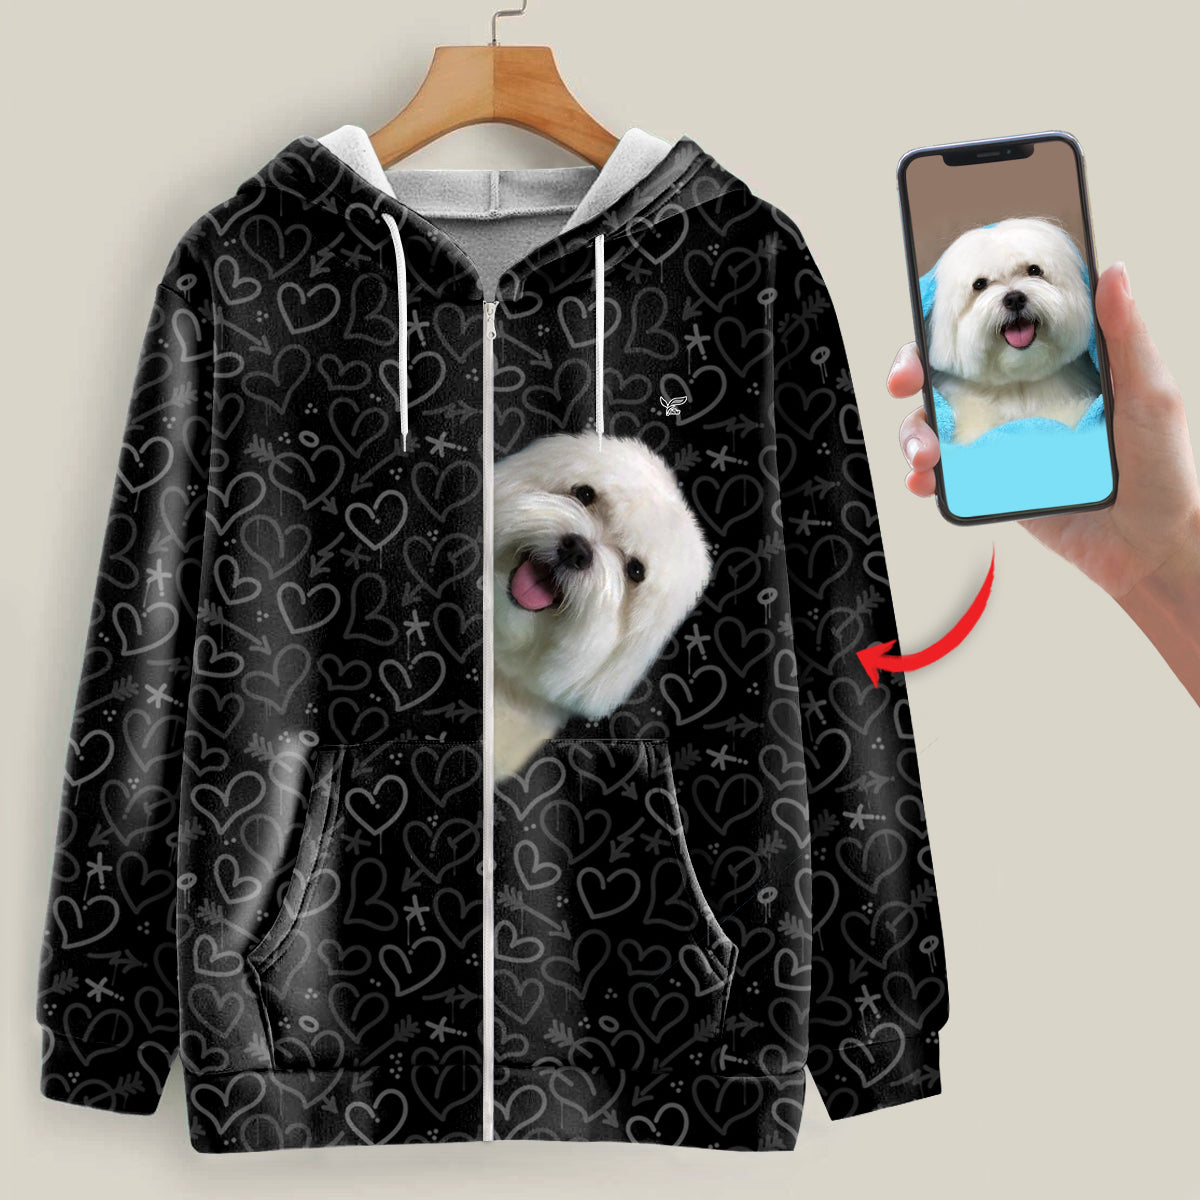 I'm Watching You, Sweetie - Personalized Hoodie With Your Pet's Photo